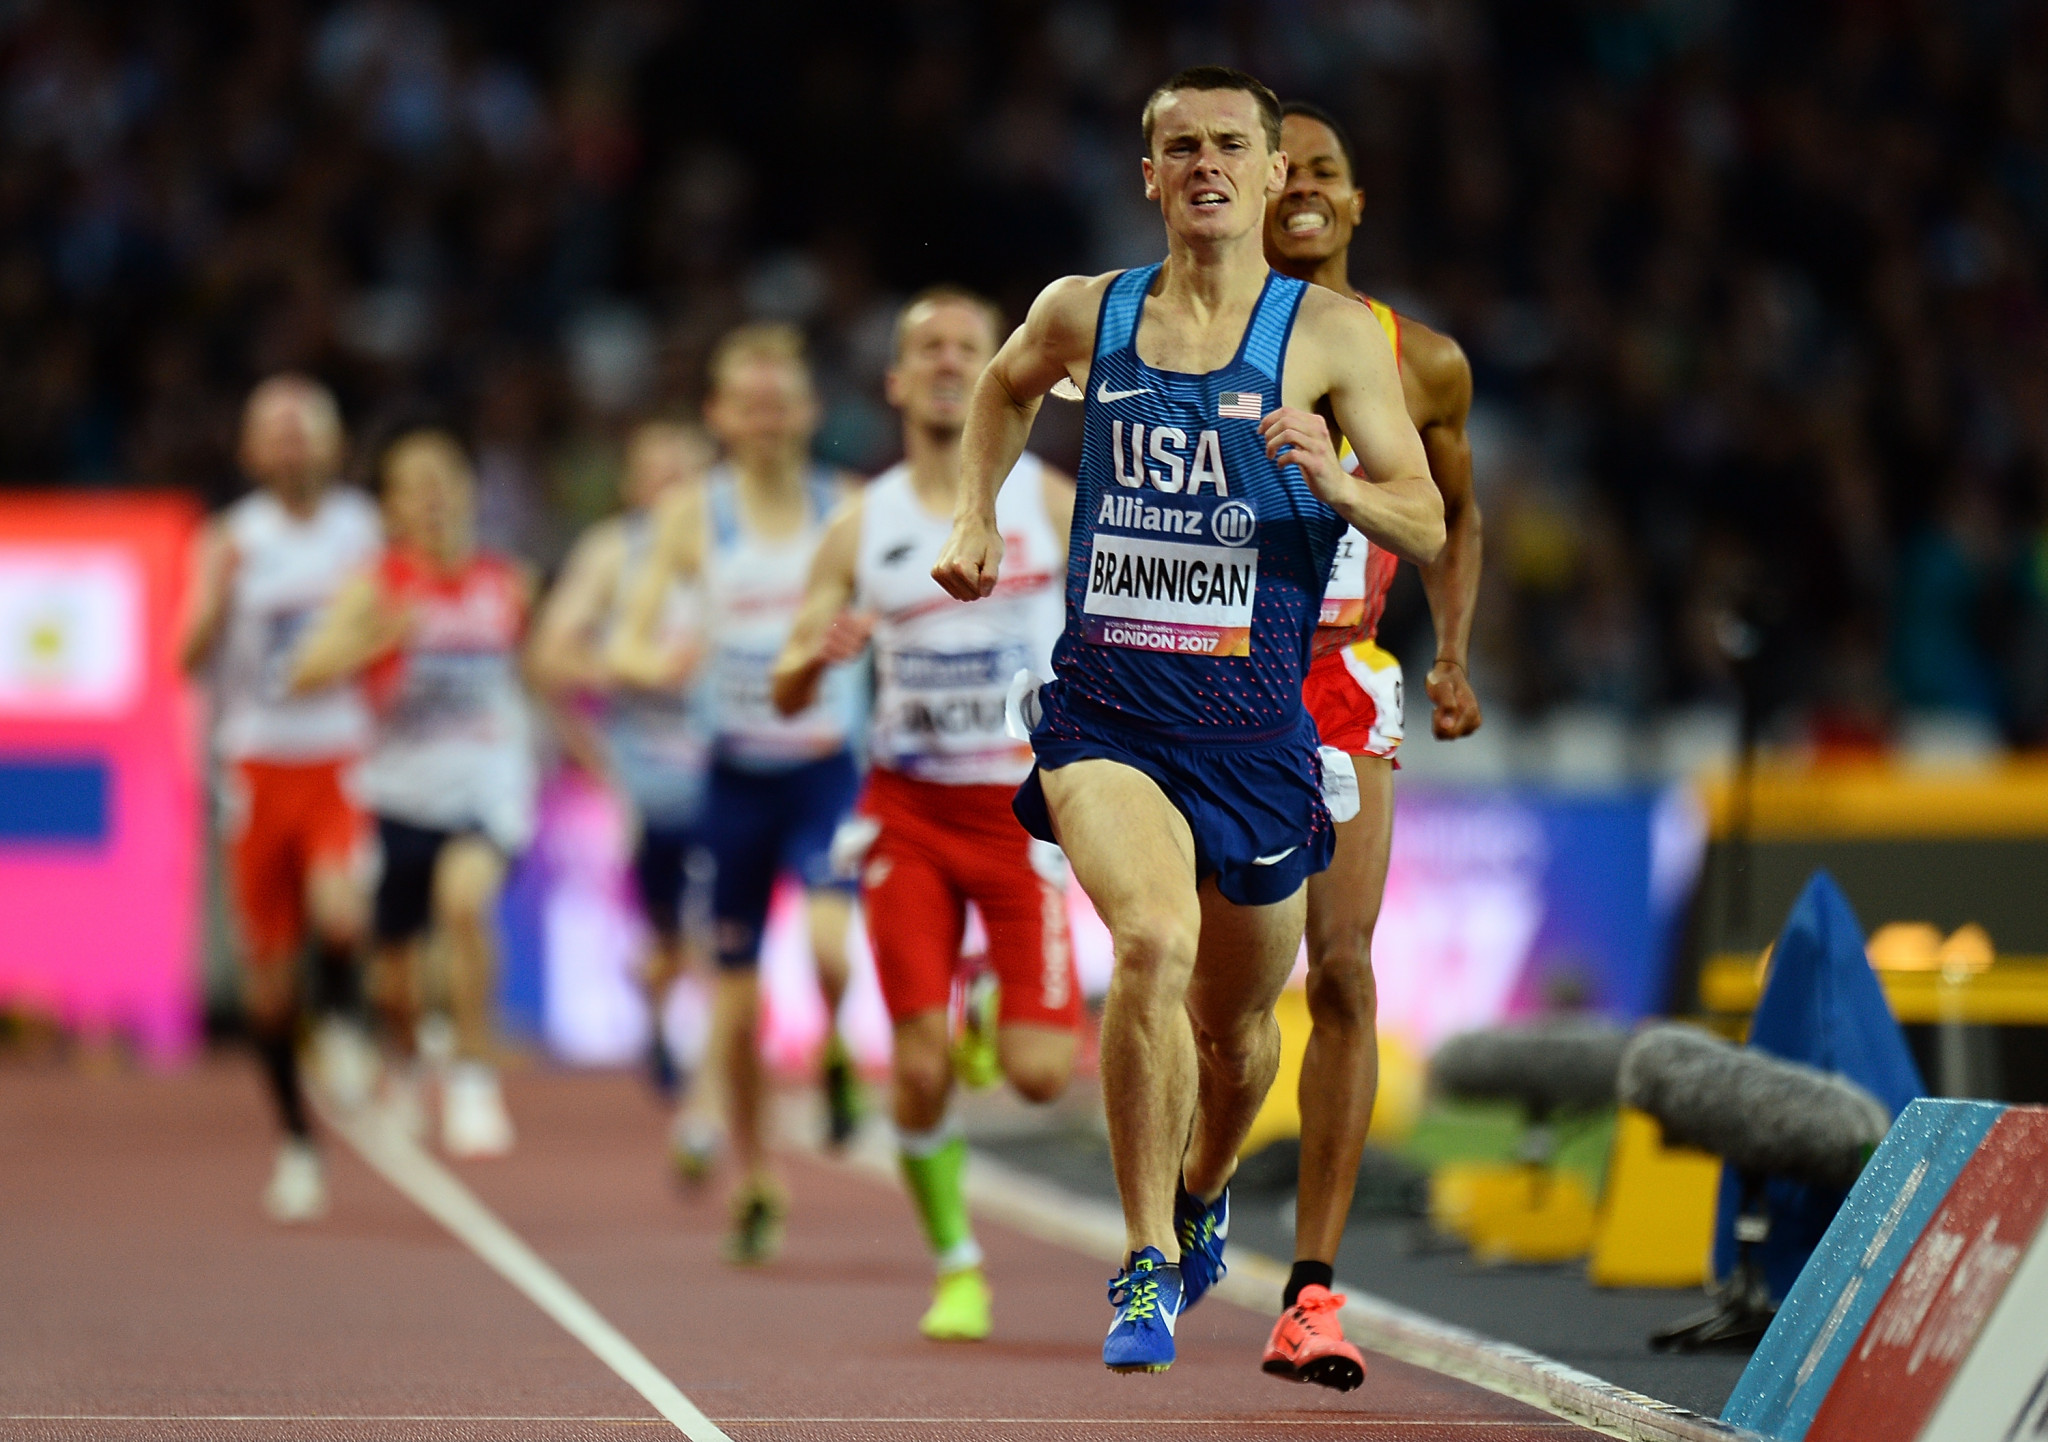 American Michael Brannigan is among the athletes set to compete in Beijing ©Getty Images